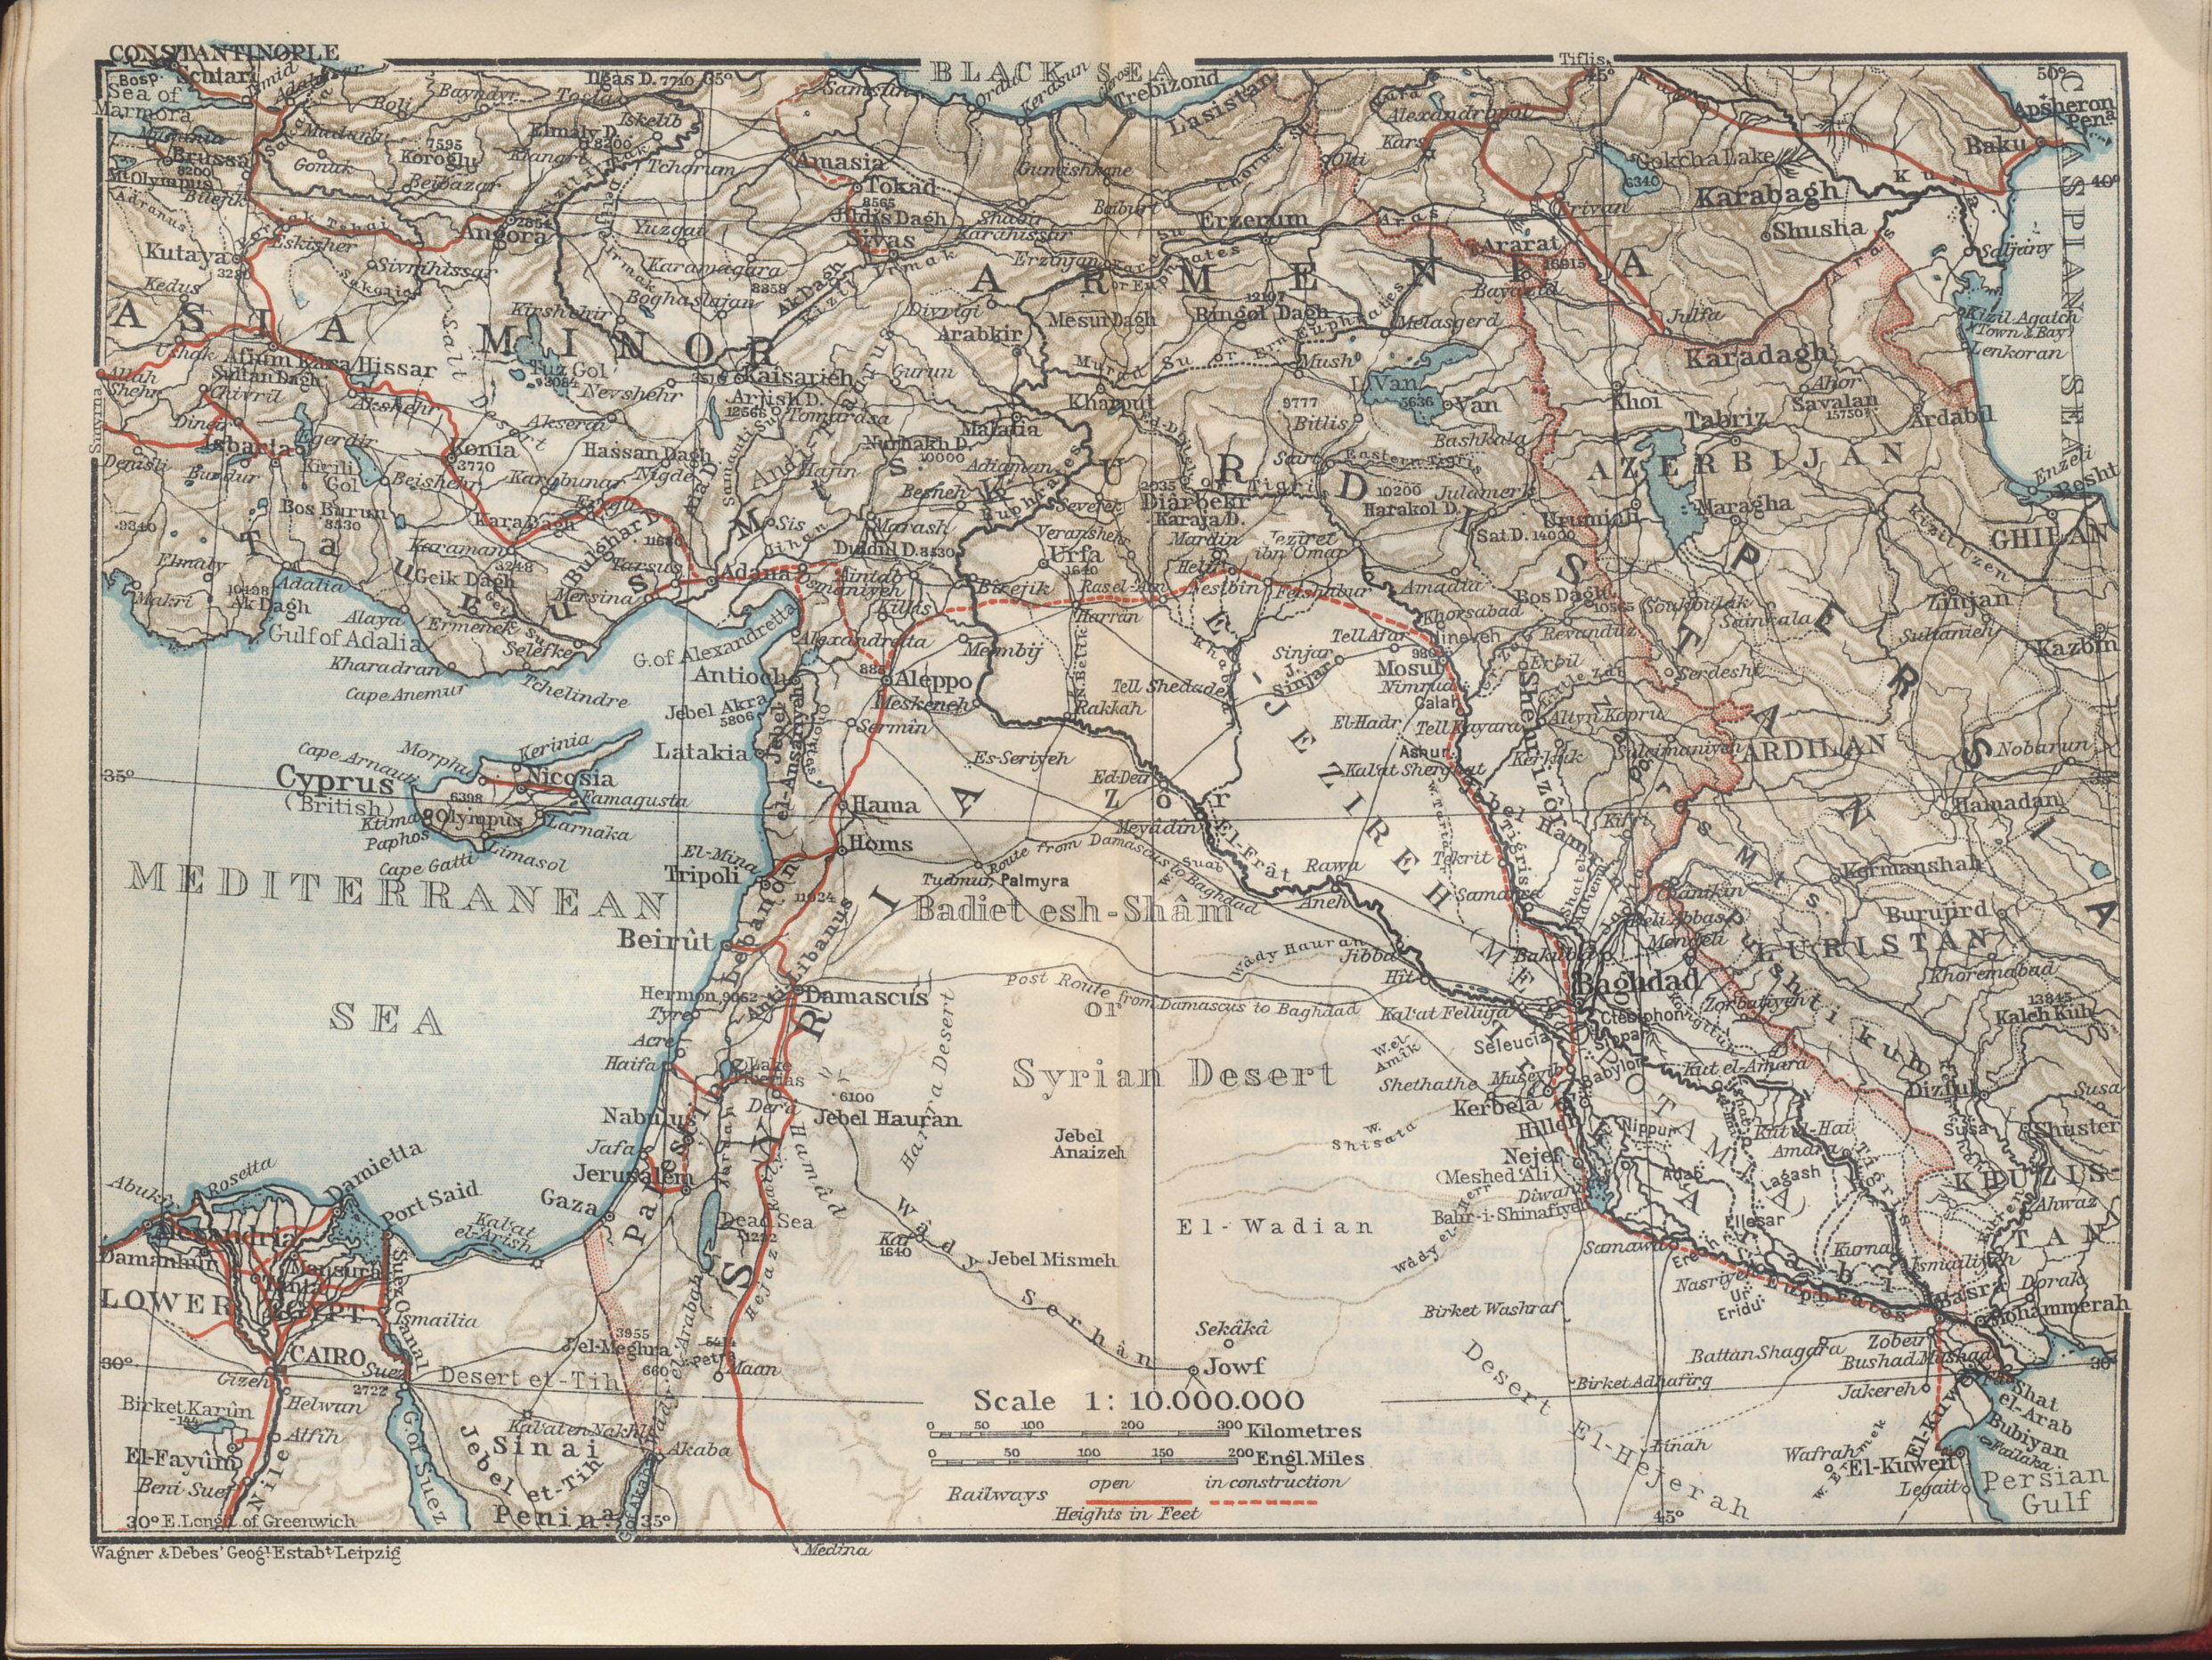 Map of Syria, Palestine, and Turkey from the Baedeker 1912 travel guide Palestine and Syria with Routes through Mesopotamia and Babylonia and with the Island of Cyprus.